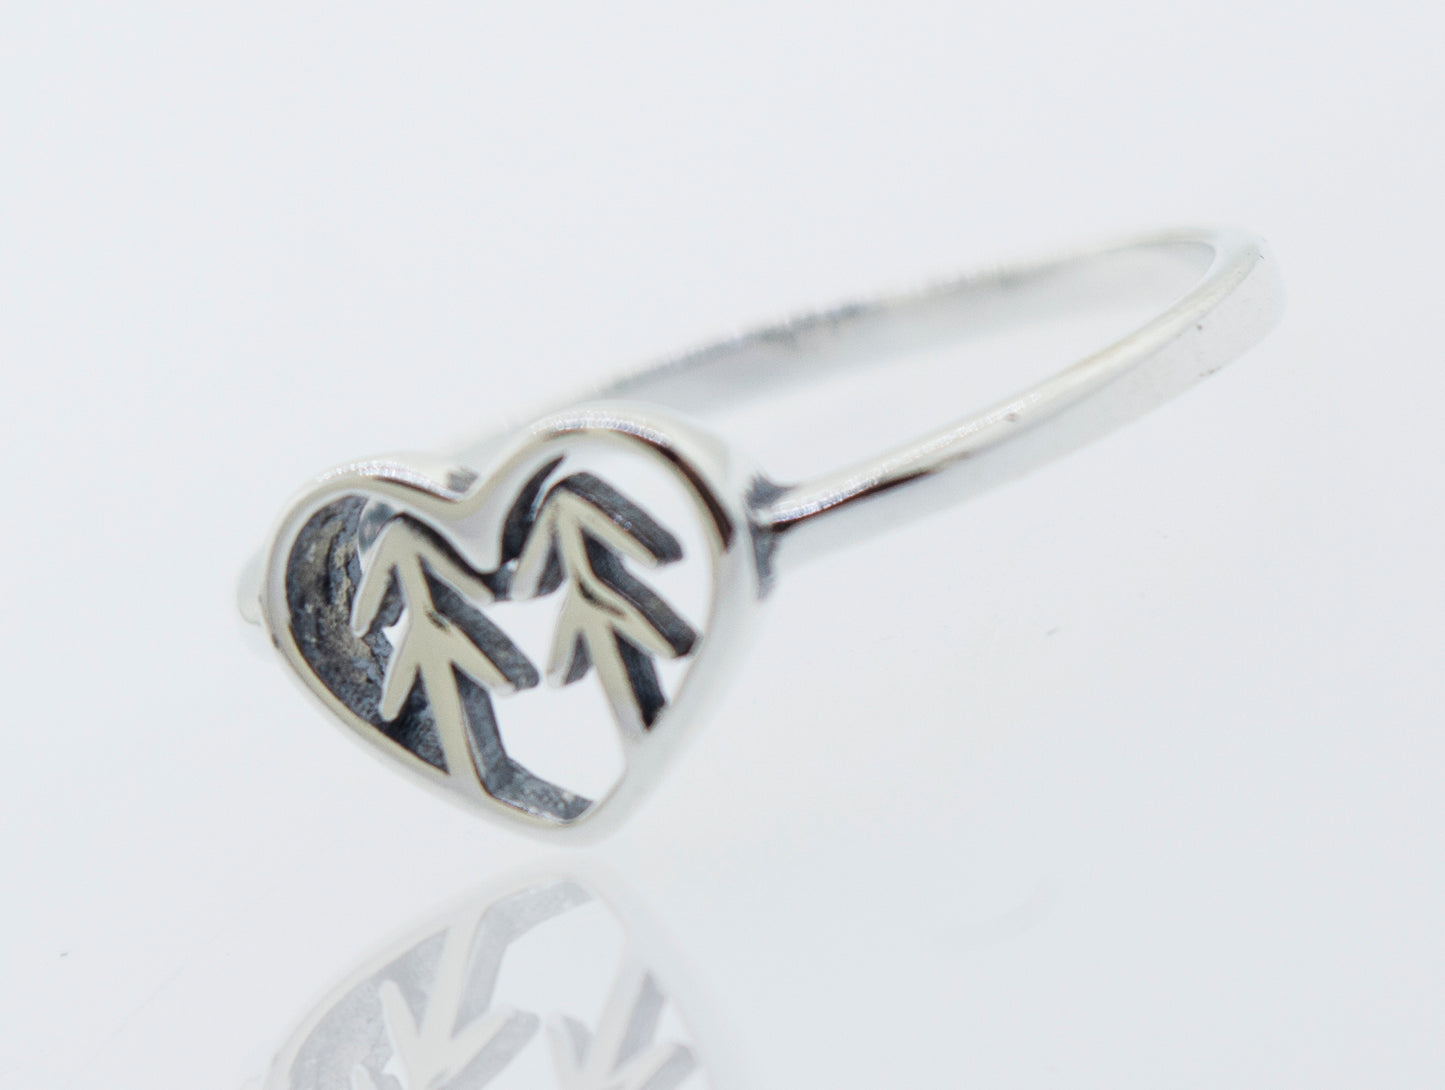 A Heart With Trees Silver Ring with a nature-inspired tree in the middle, symbolizing love and connection to the natural world.